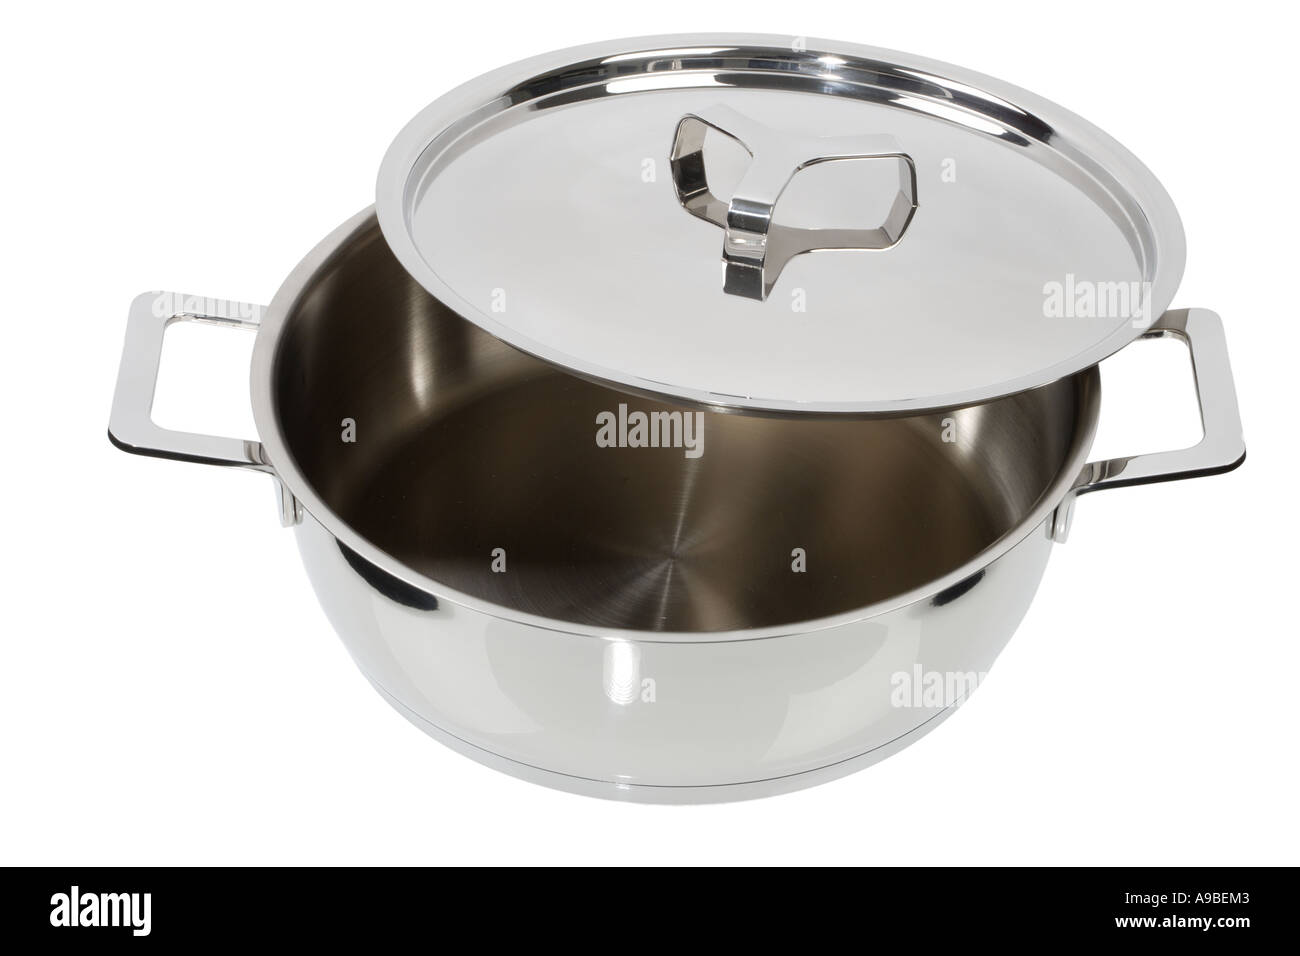 stainless steel saucepan with lid Stock Photo